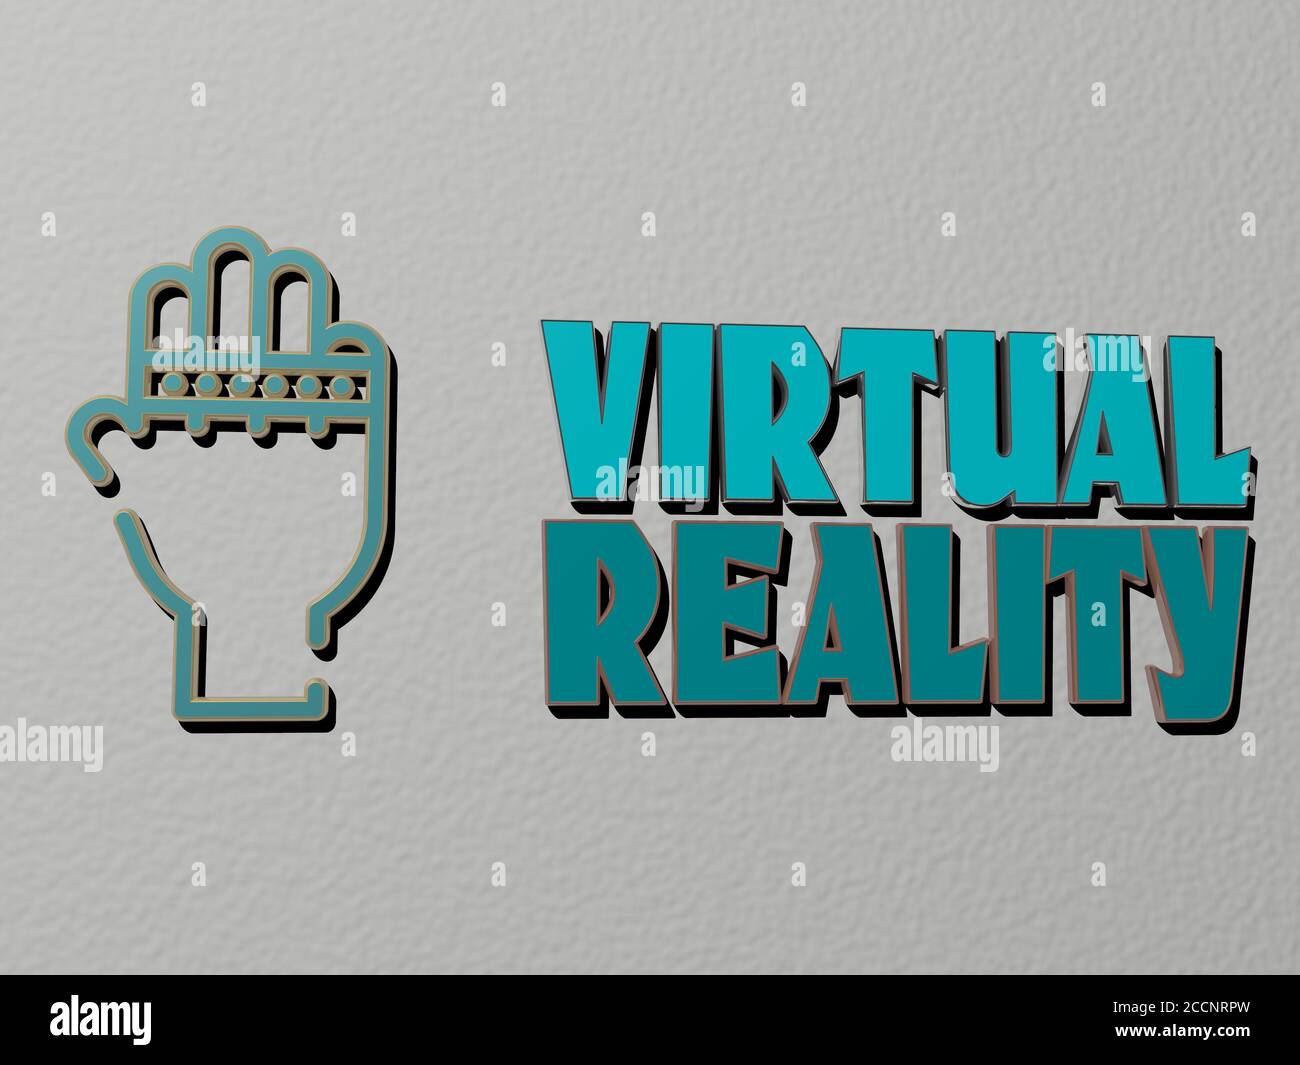 VIRTUAL REALITY icon and text on the wall, 3D illustration Stock Photo